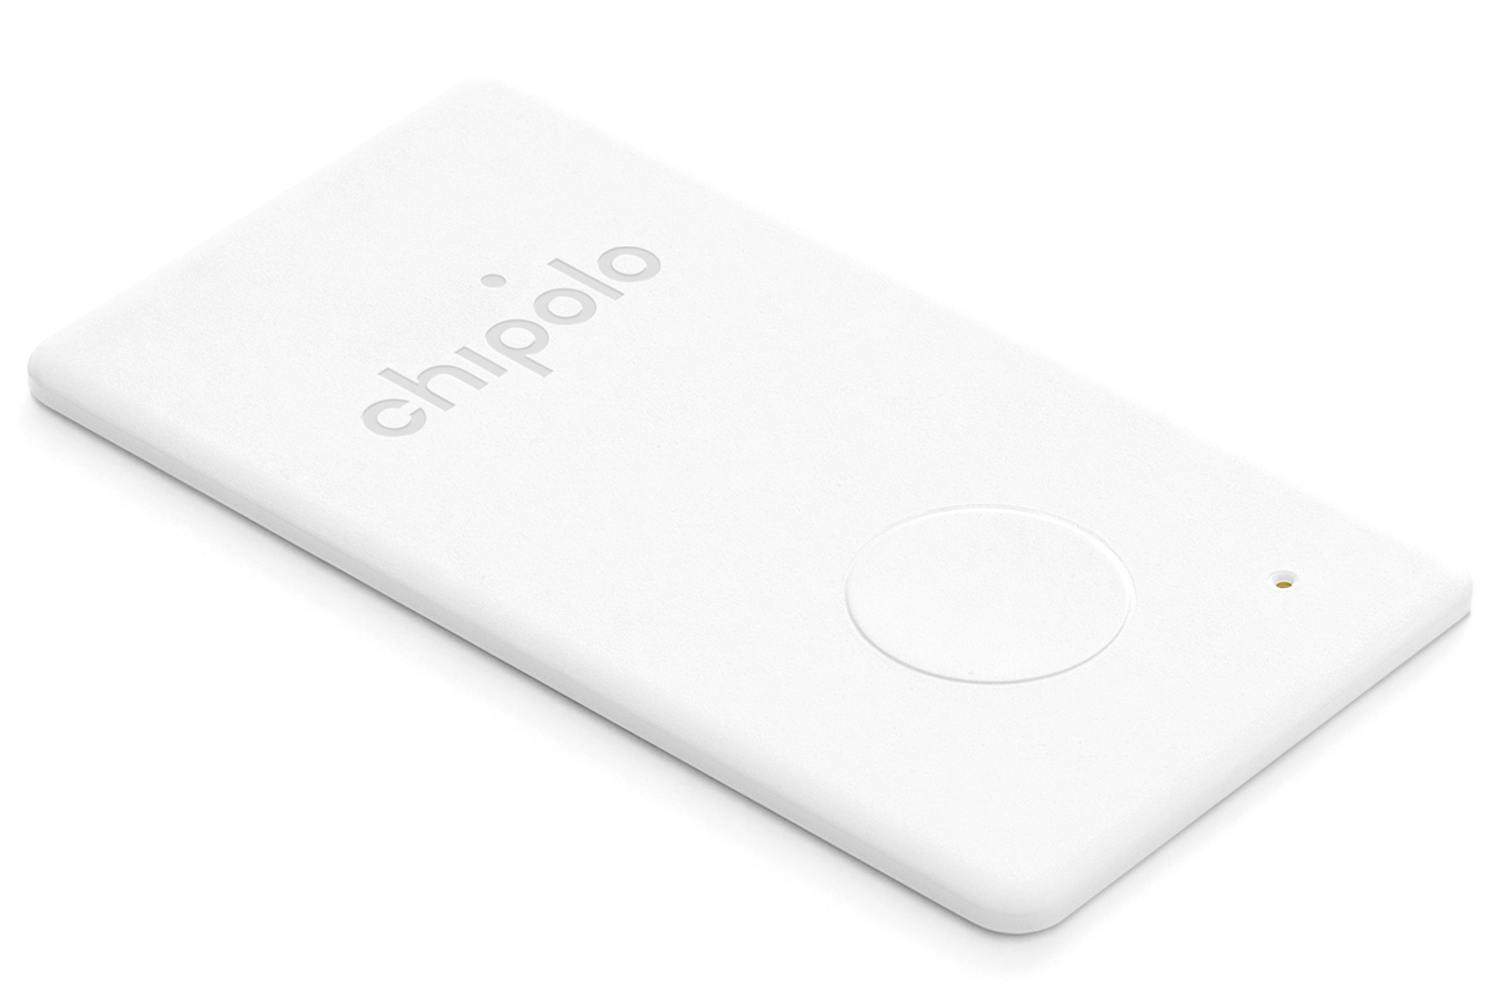 Chipolo Card Bluetooth Item Finder